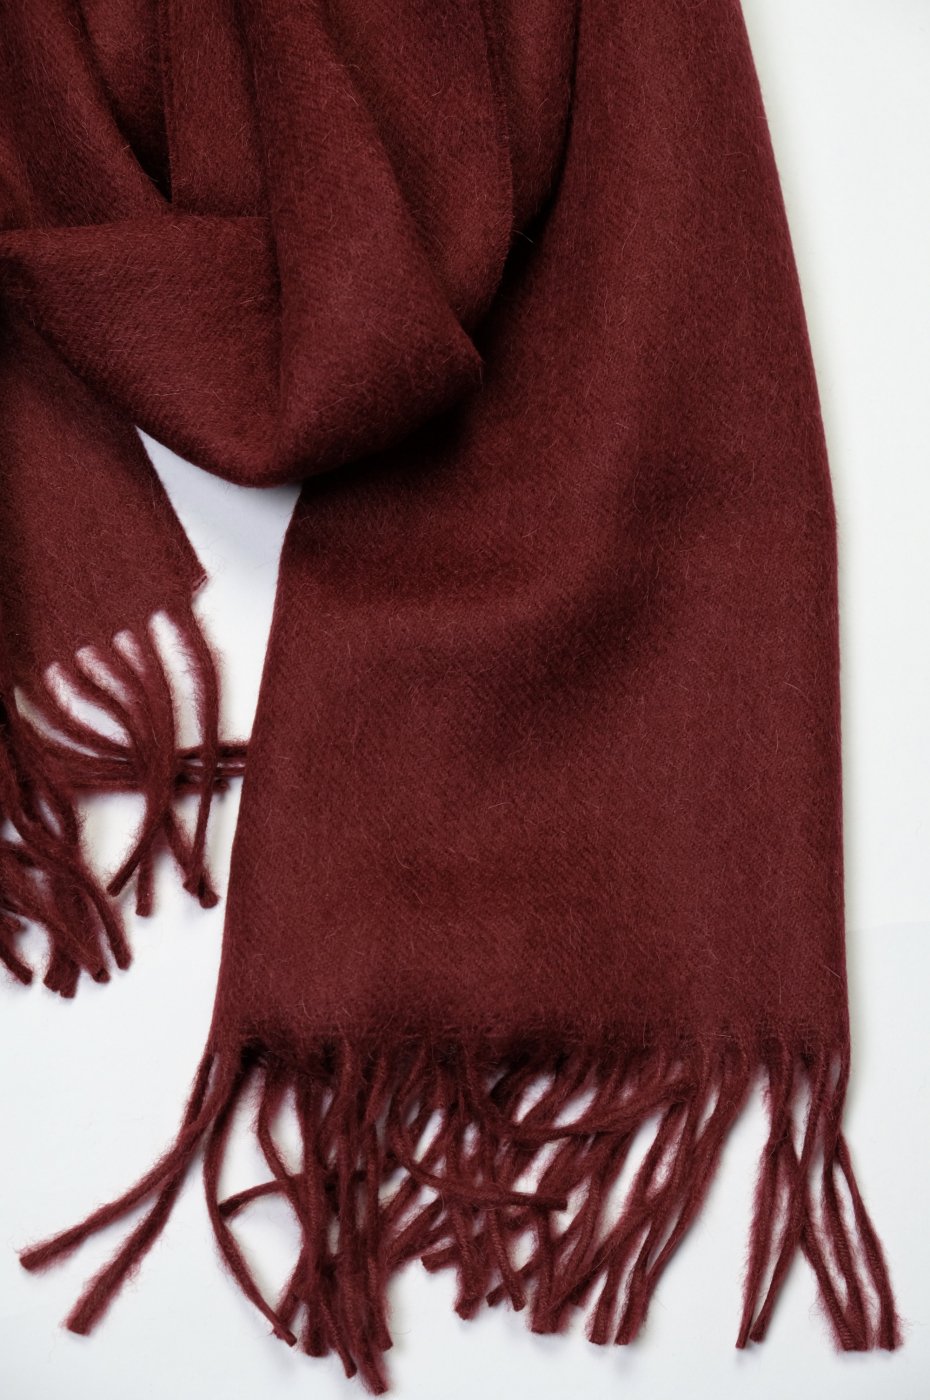 THE INOUE BROTHERSザ イノウエブラザーズ-BRUSHED SCARF-BURGUNDY - LOCALERS